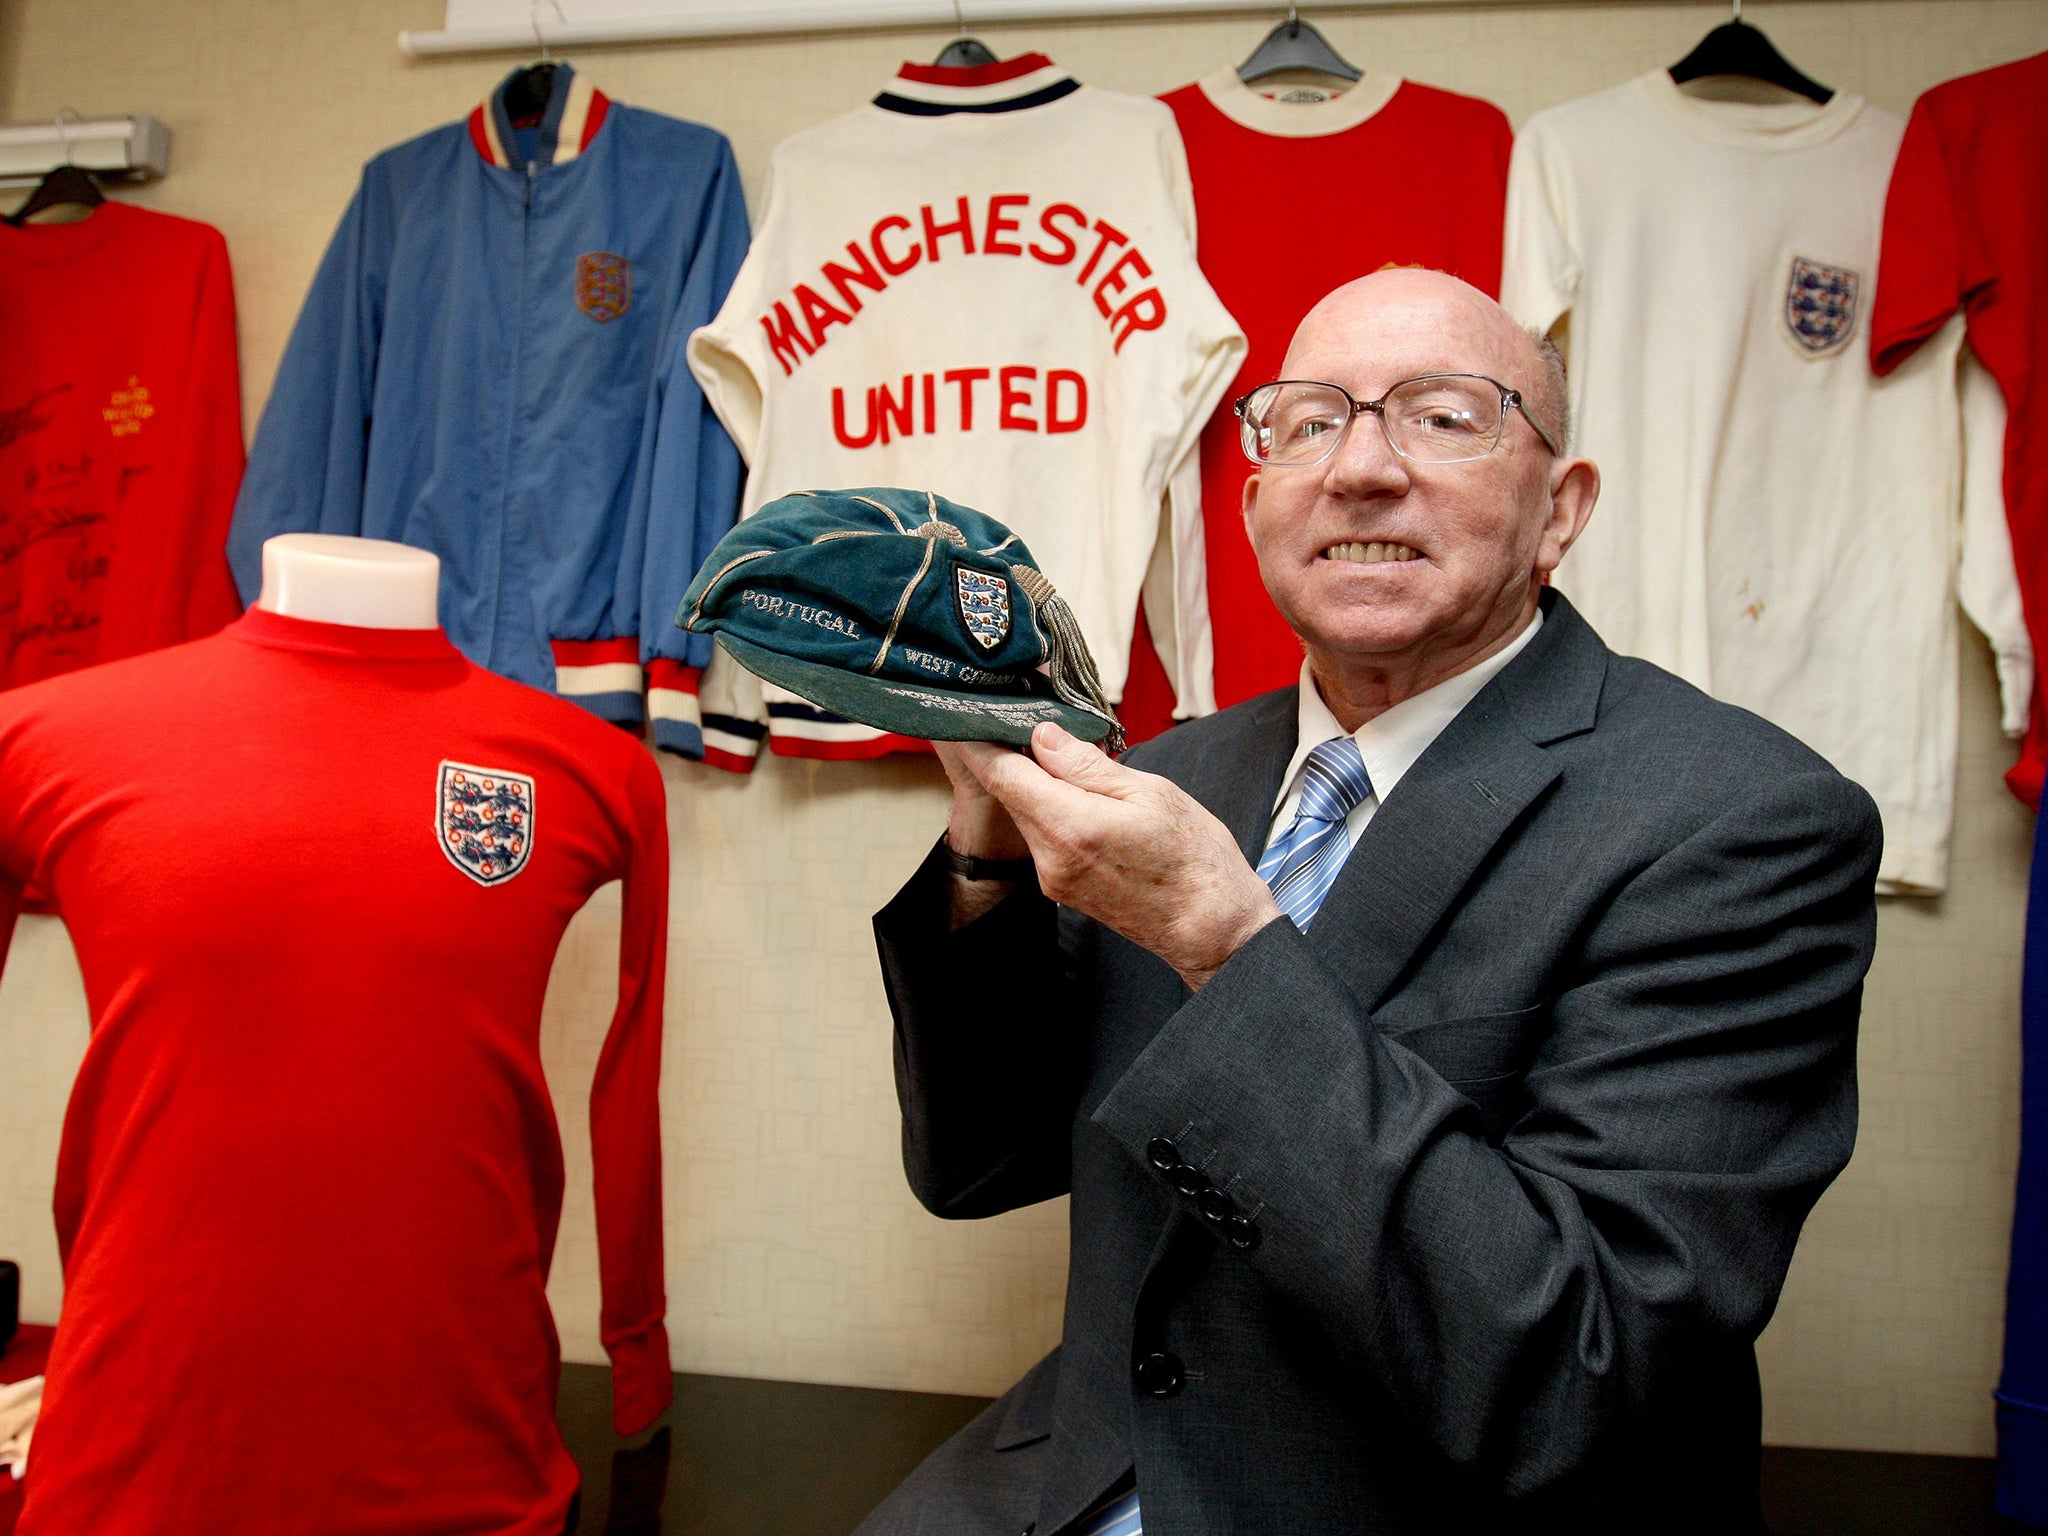 Nobby Stiles suffered dementia due to heading a football, doctors believe